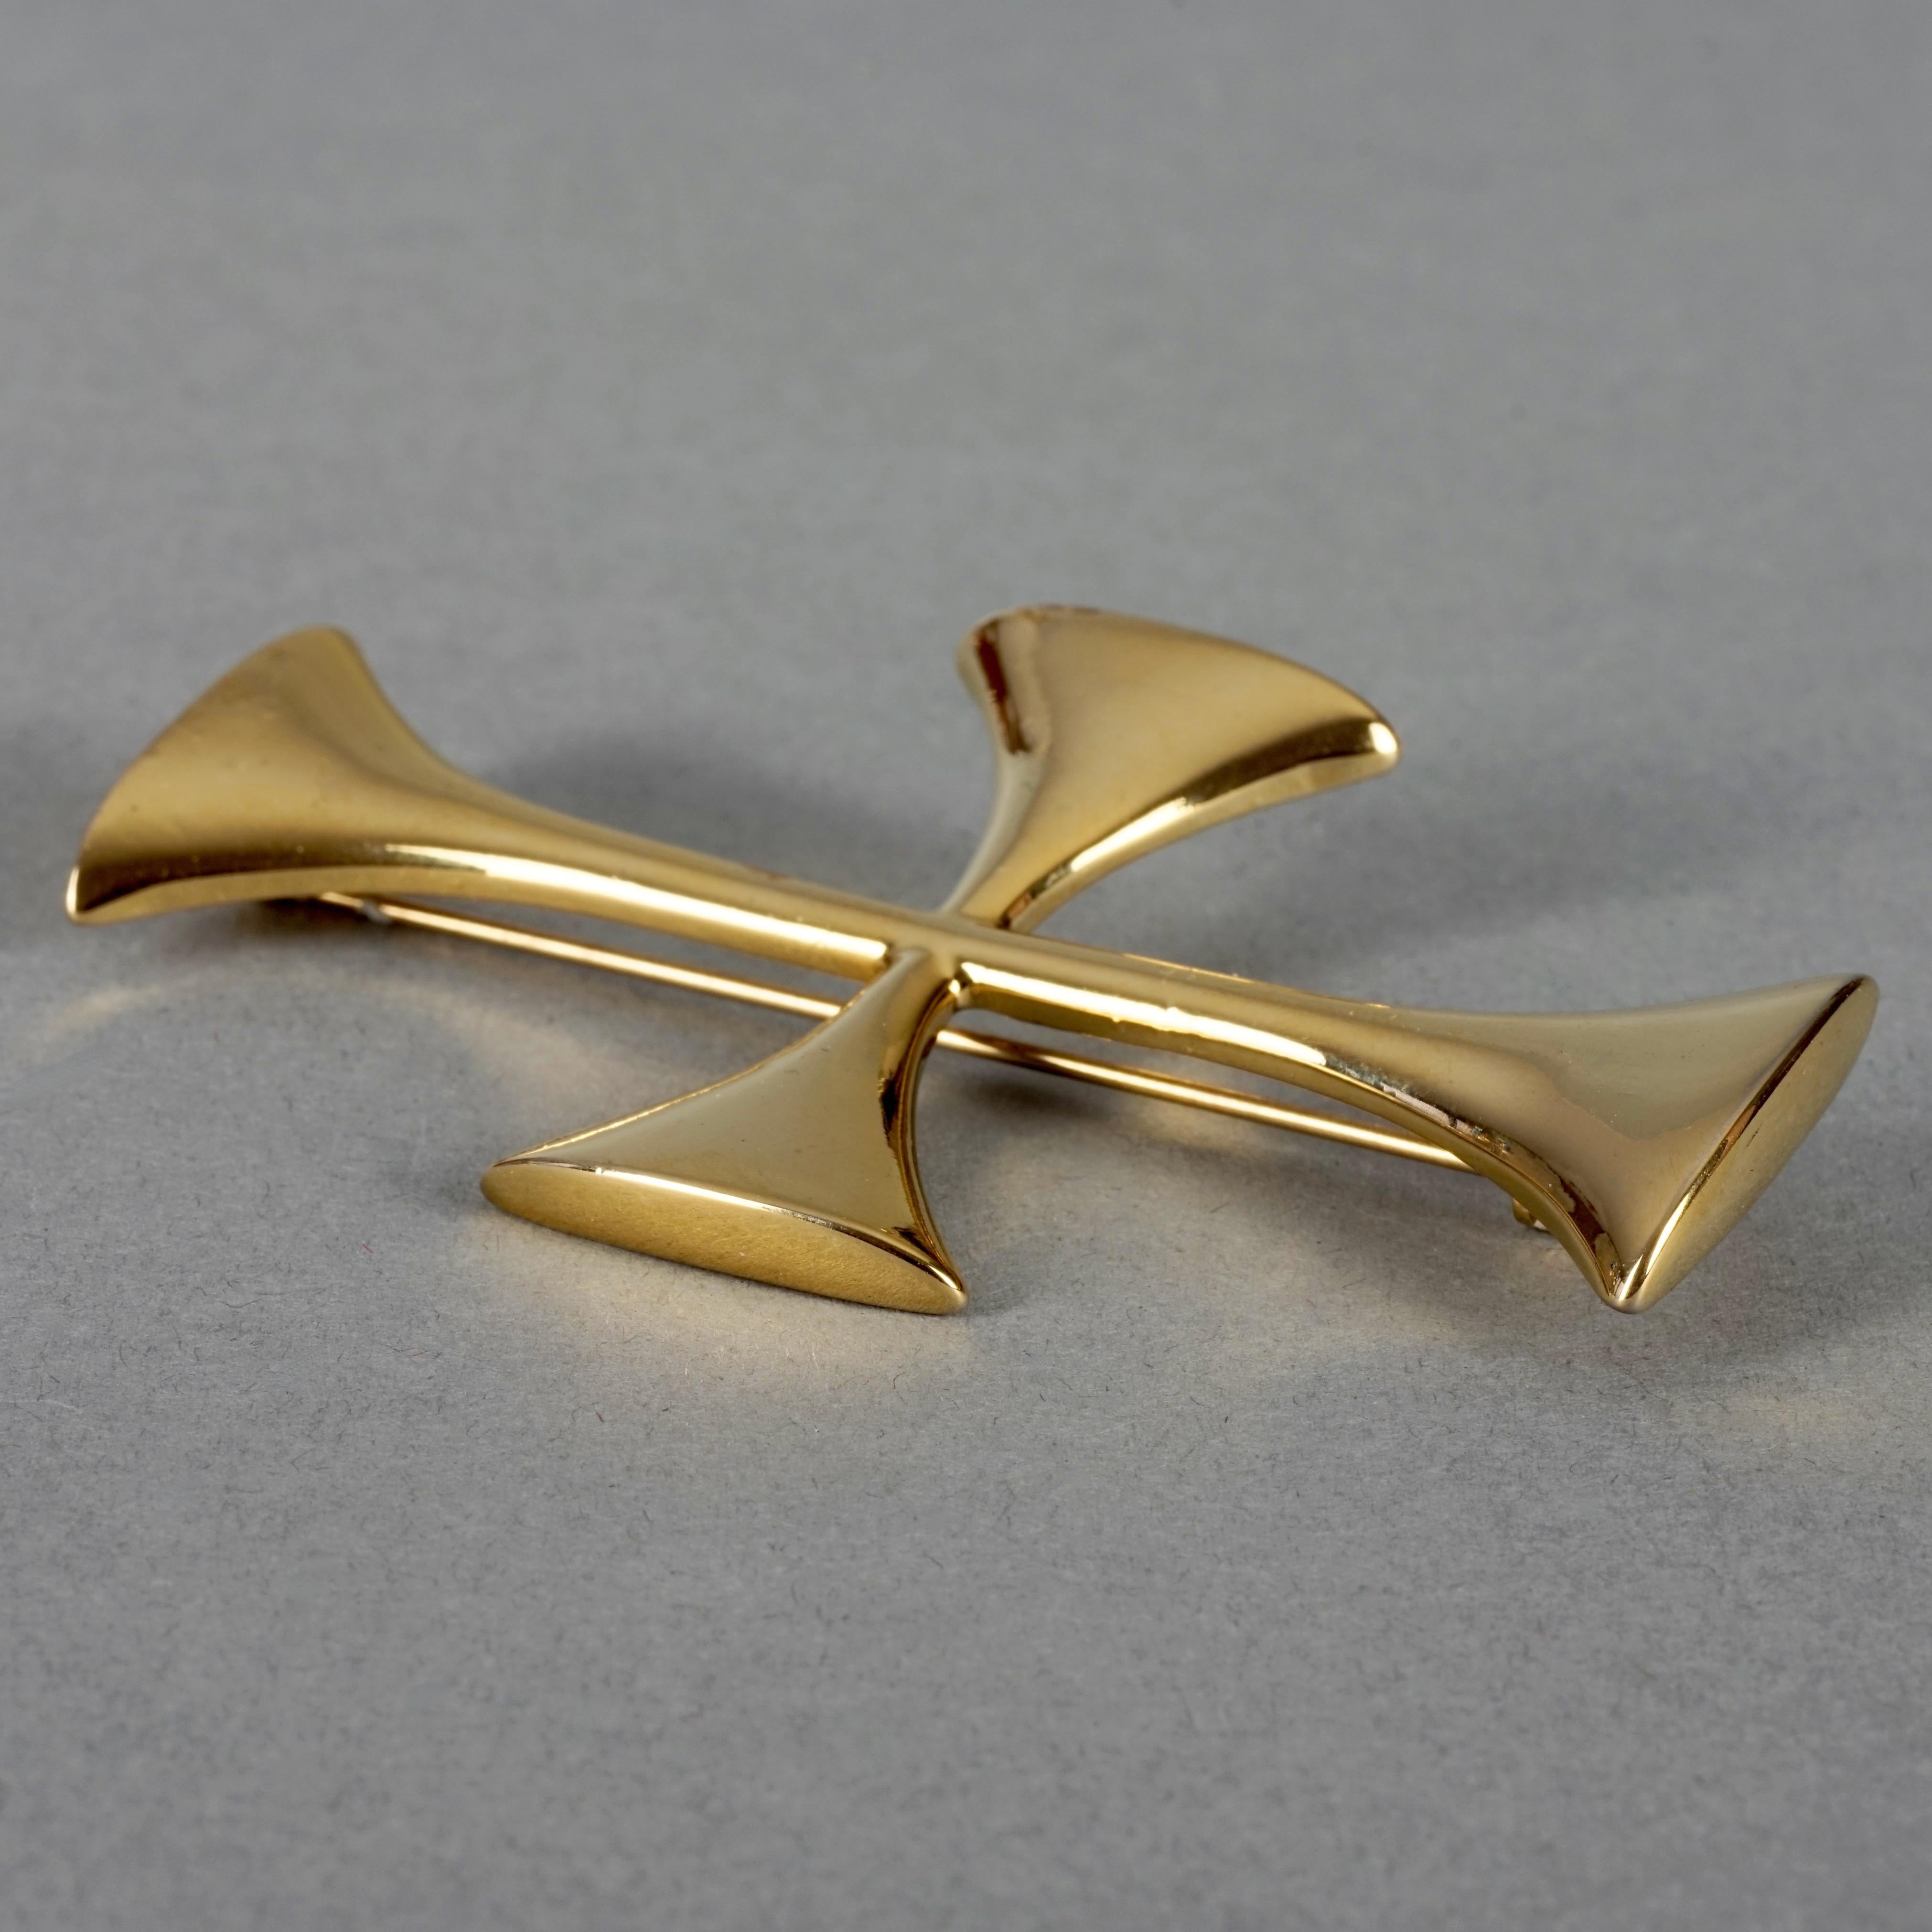 Vintage MOSCHINO Templar Cross Novelty Brooch In Excellent Condition For Sale In Kingersheim, Alsace